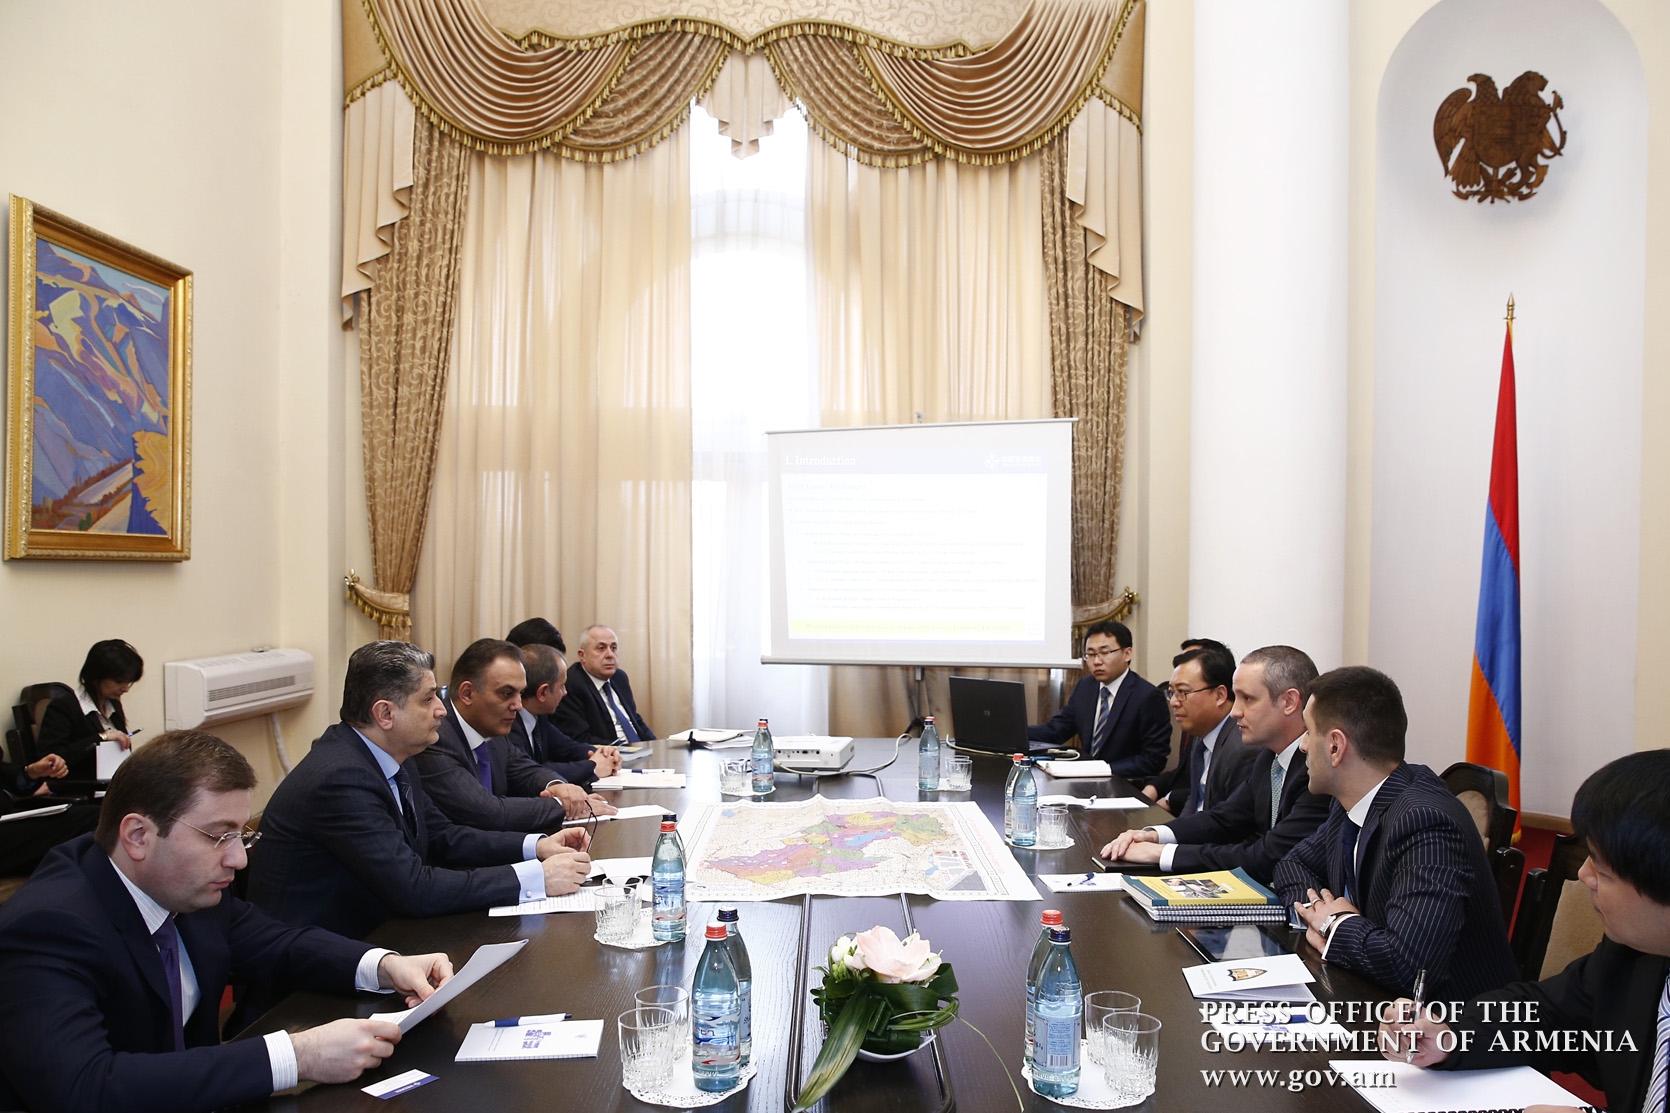 
Draft for “Armenia’s Southern Railway” is ready
